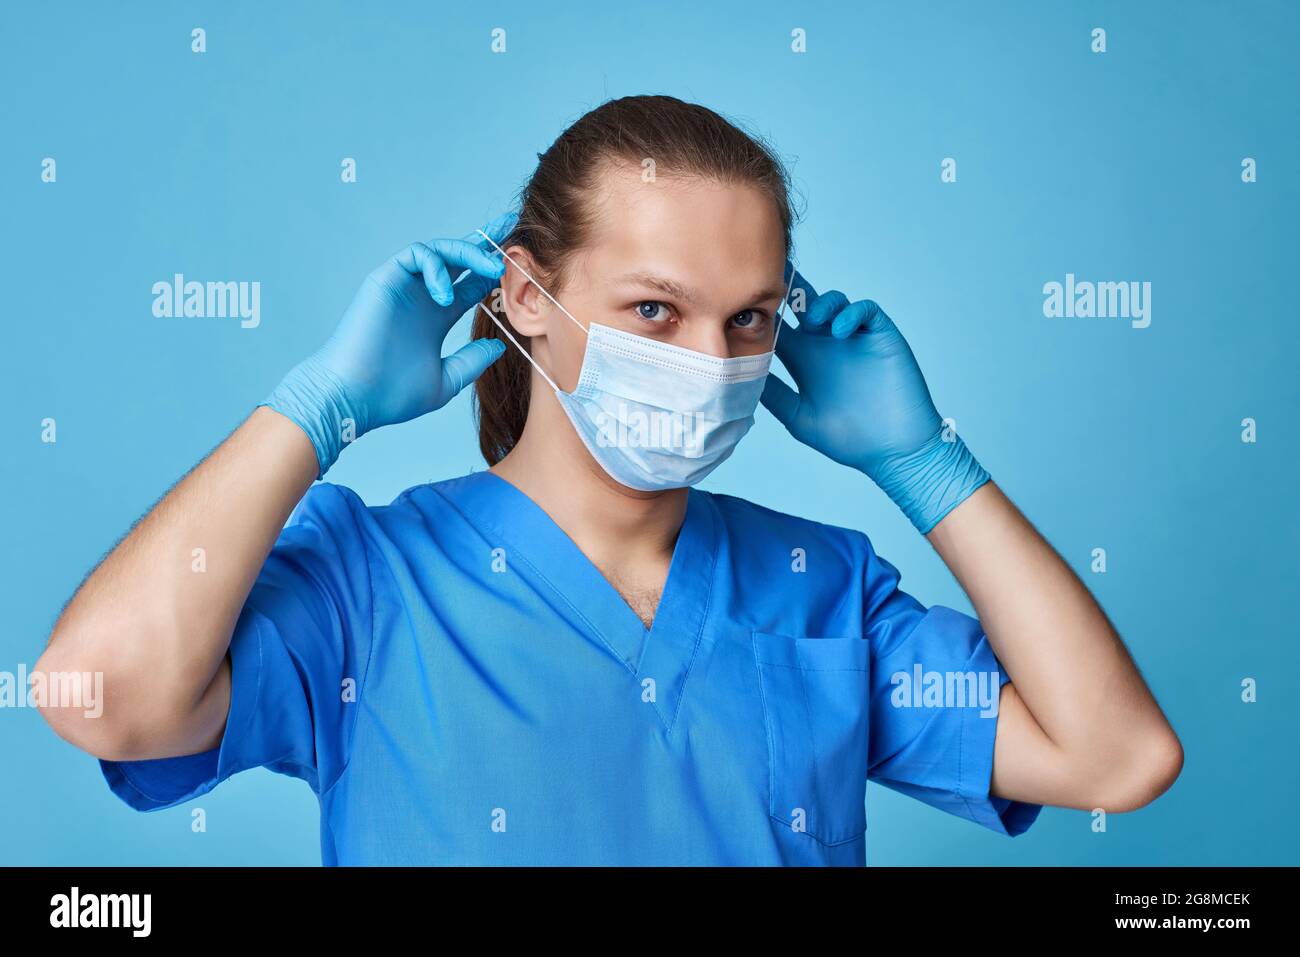 young man doctor in uniform wearing mask Stock Photo